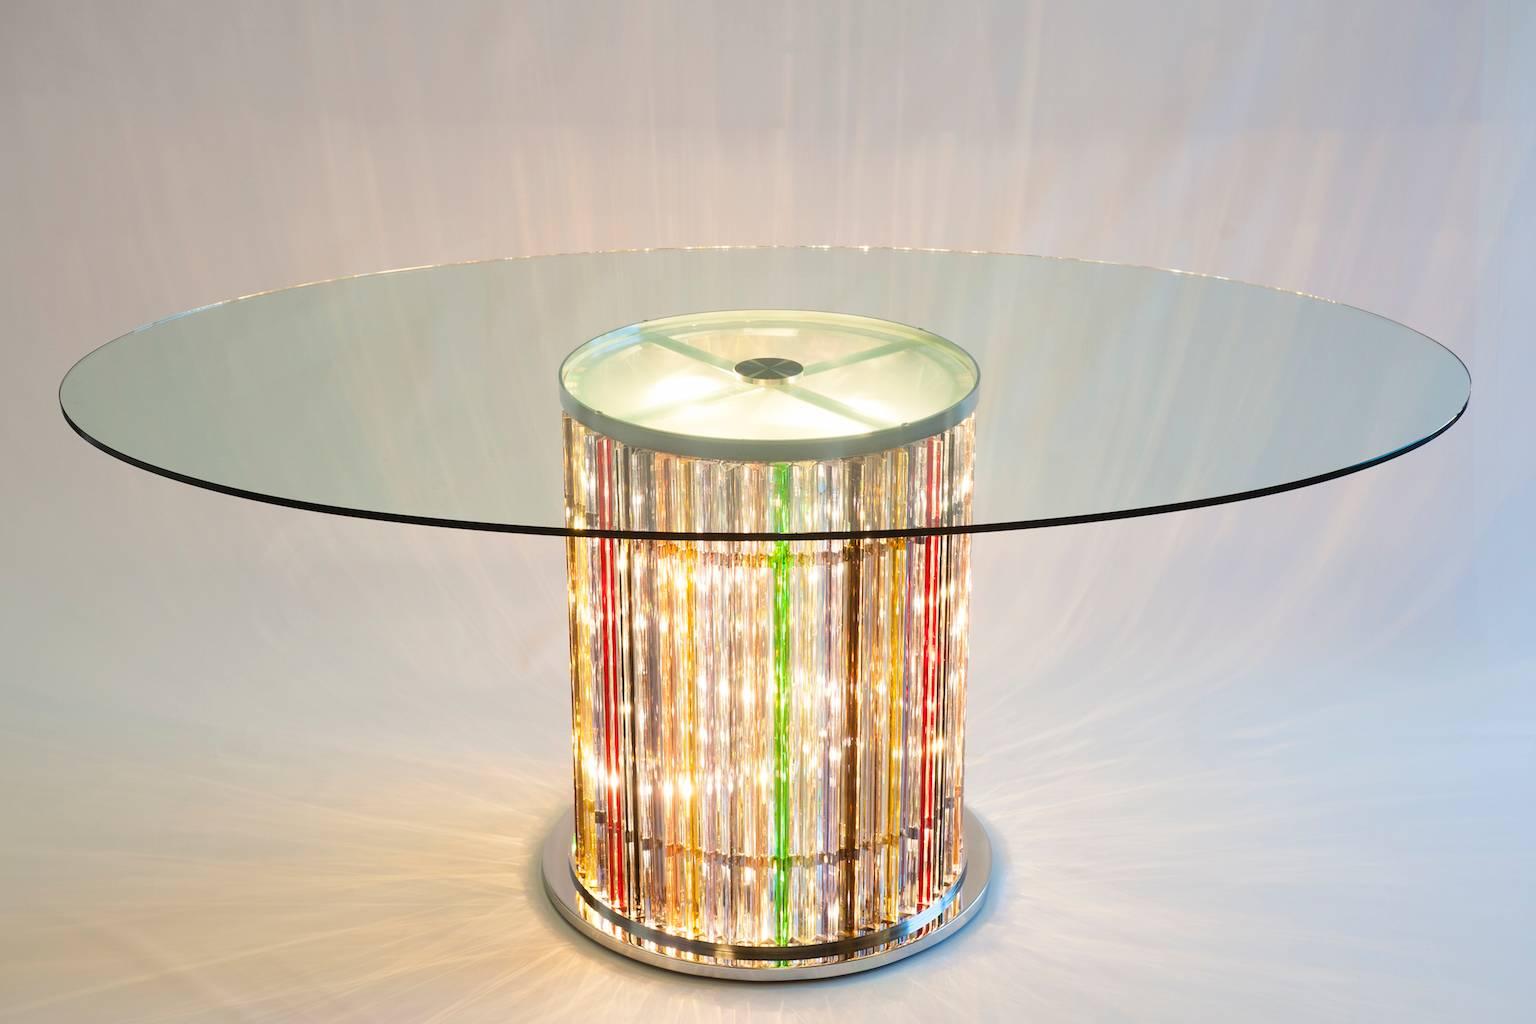 Italian Murano Dining Table with Lights in the Stem, circa 1980s 4